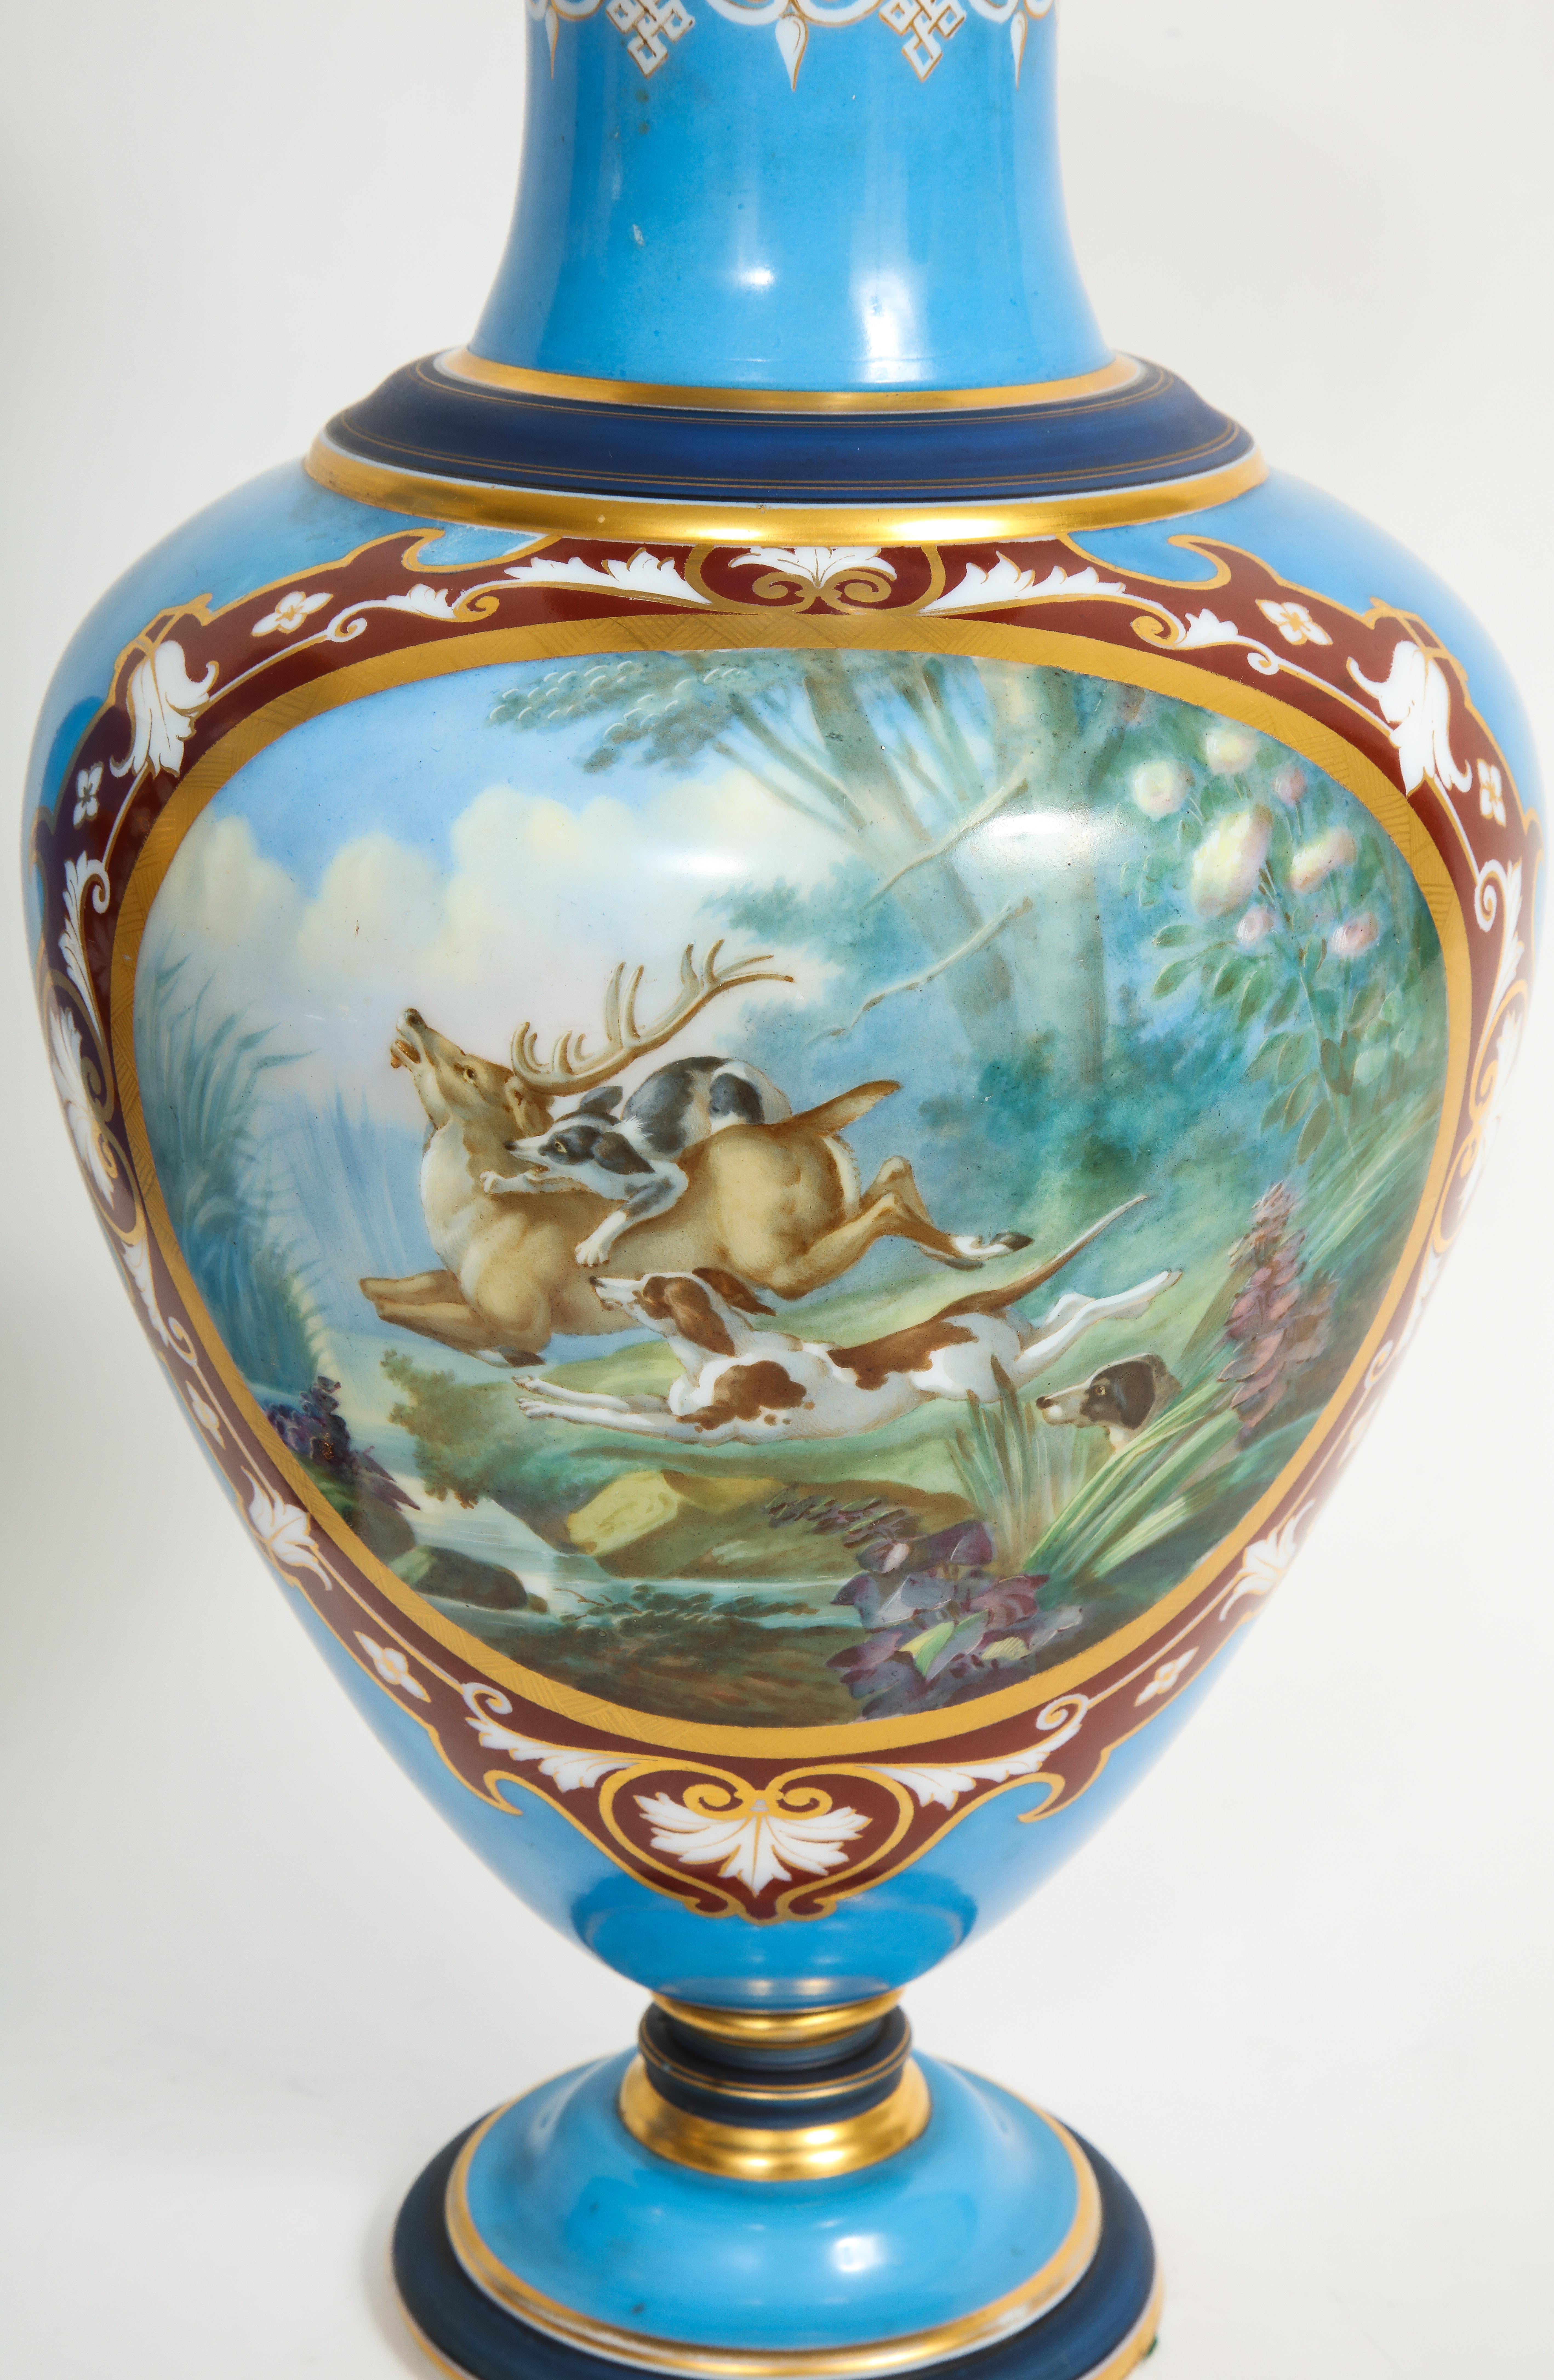 19th Century French Pair of Baccarat Enameled Opaline Vases with Hunting Scenes For Sale 6